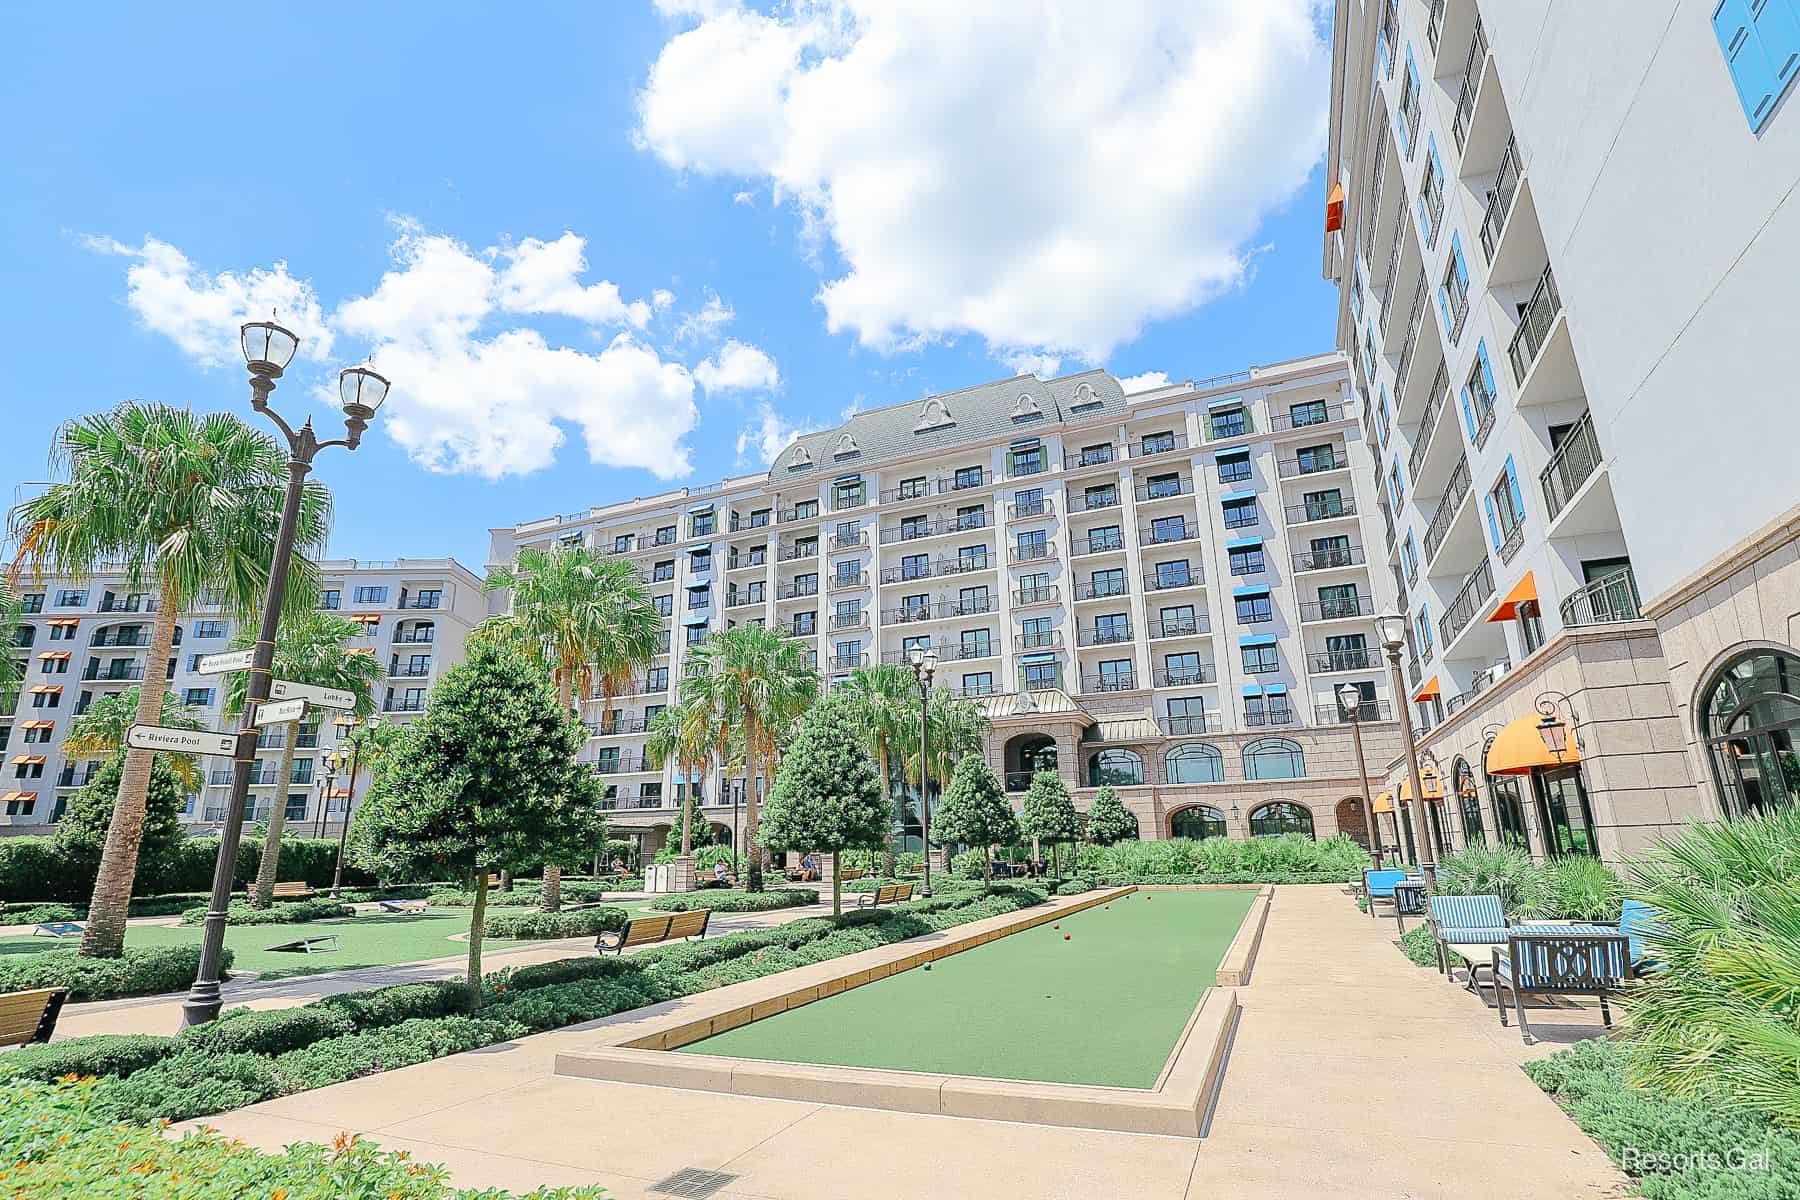 the resort side of Disney's Riviera with a long green Bocce ball court 